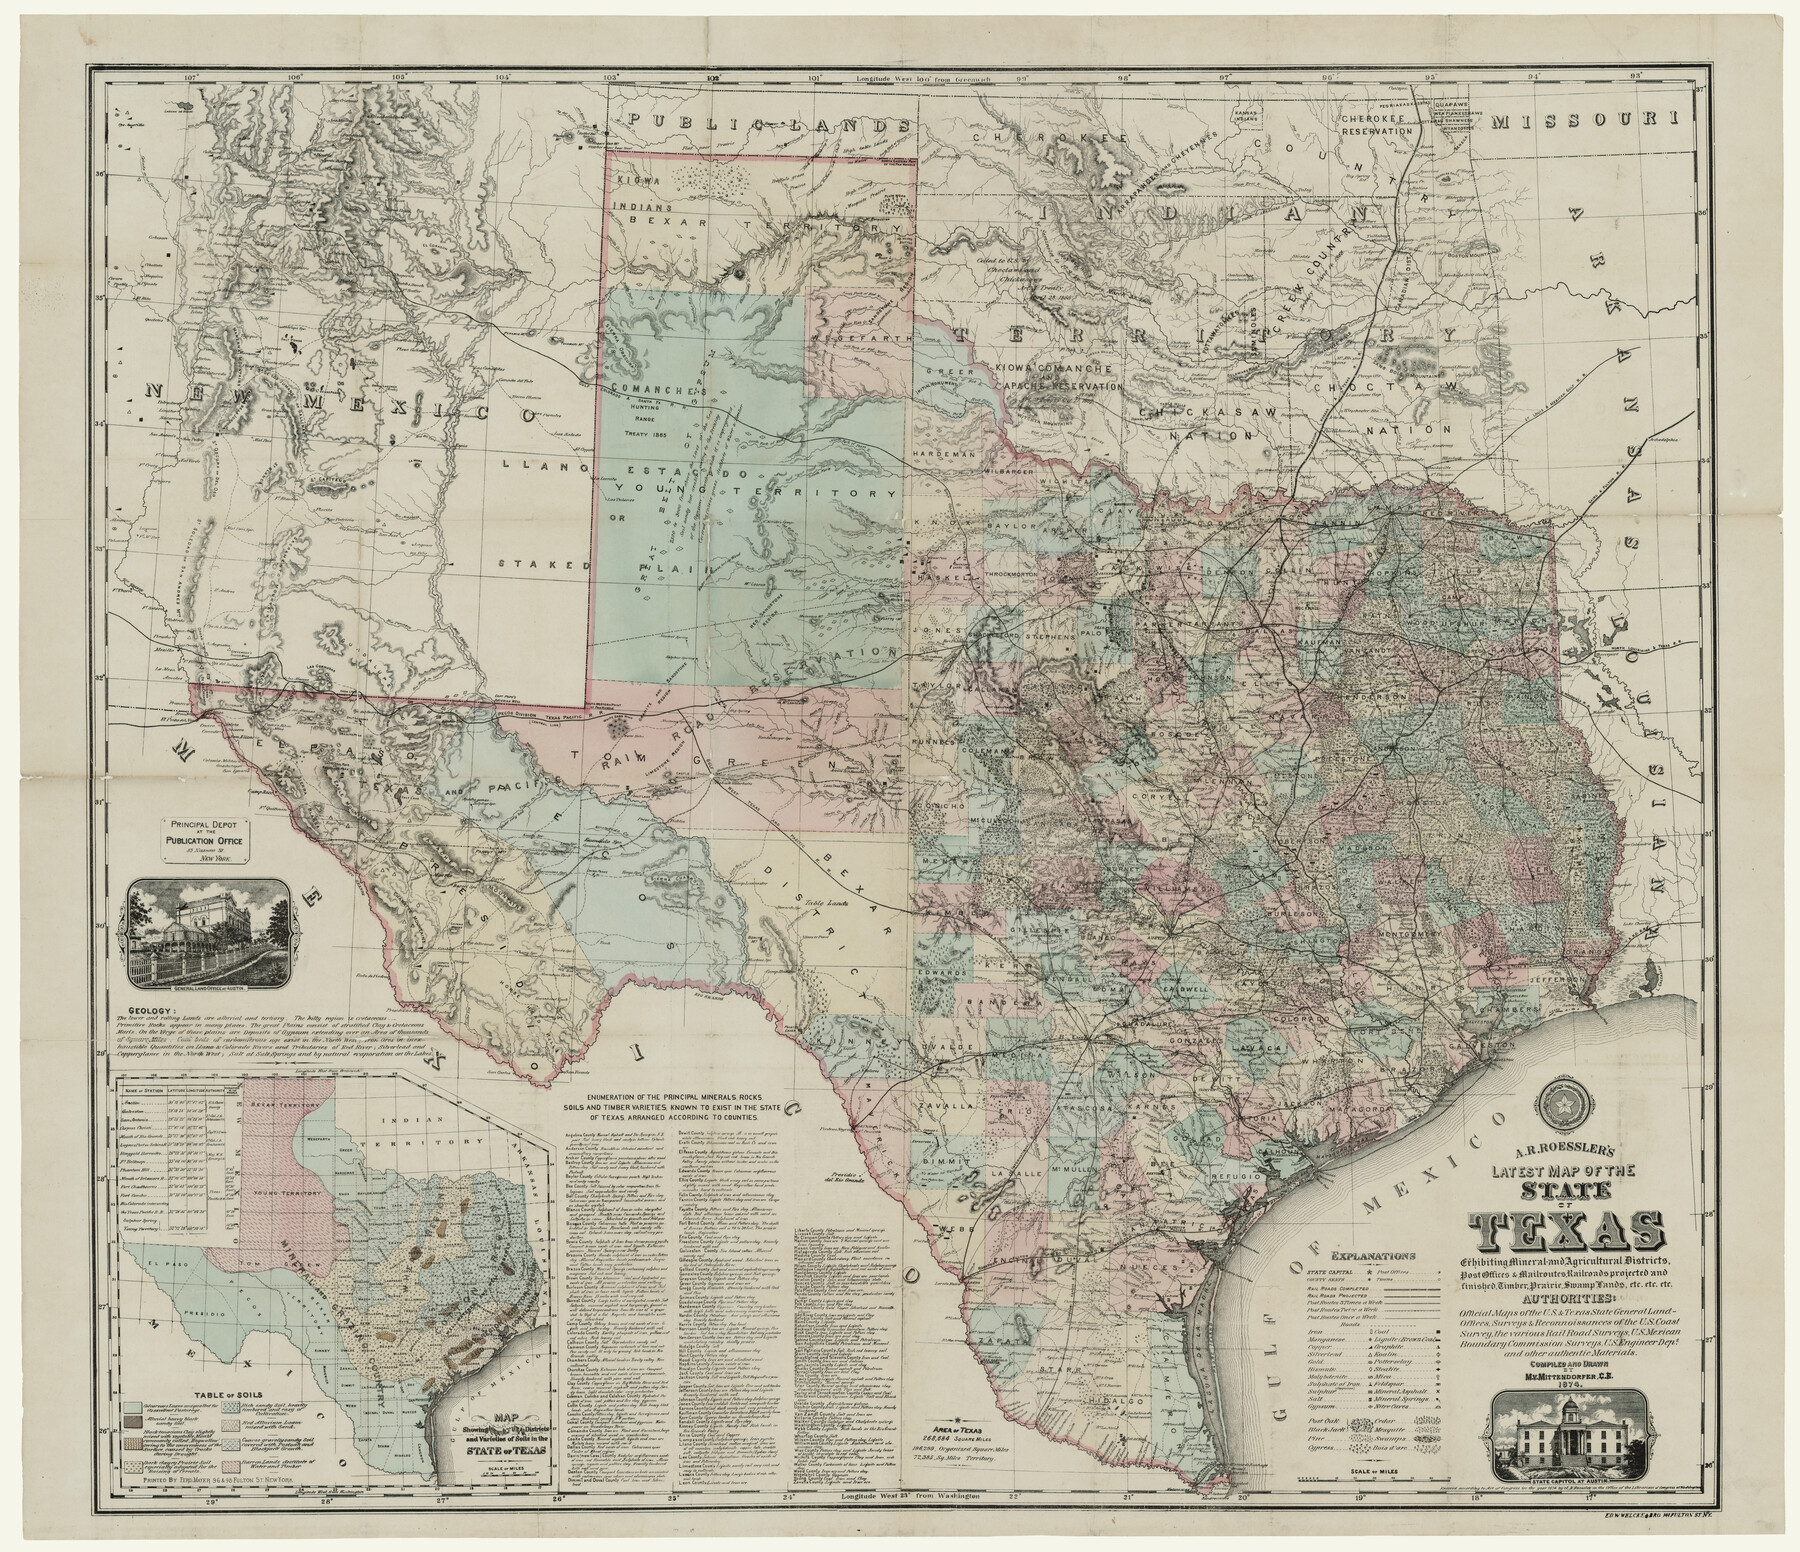 93934, A. R. Roessler's Latest Map of the State of Texas Exhibiting Mineral and Agricultural Districts, Post Offices and Mailroutes, Railroads projected and finished, Timber, Prairie, Swamp Lands, etc. etc. etc., Rees-Jones Digital Map Collection